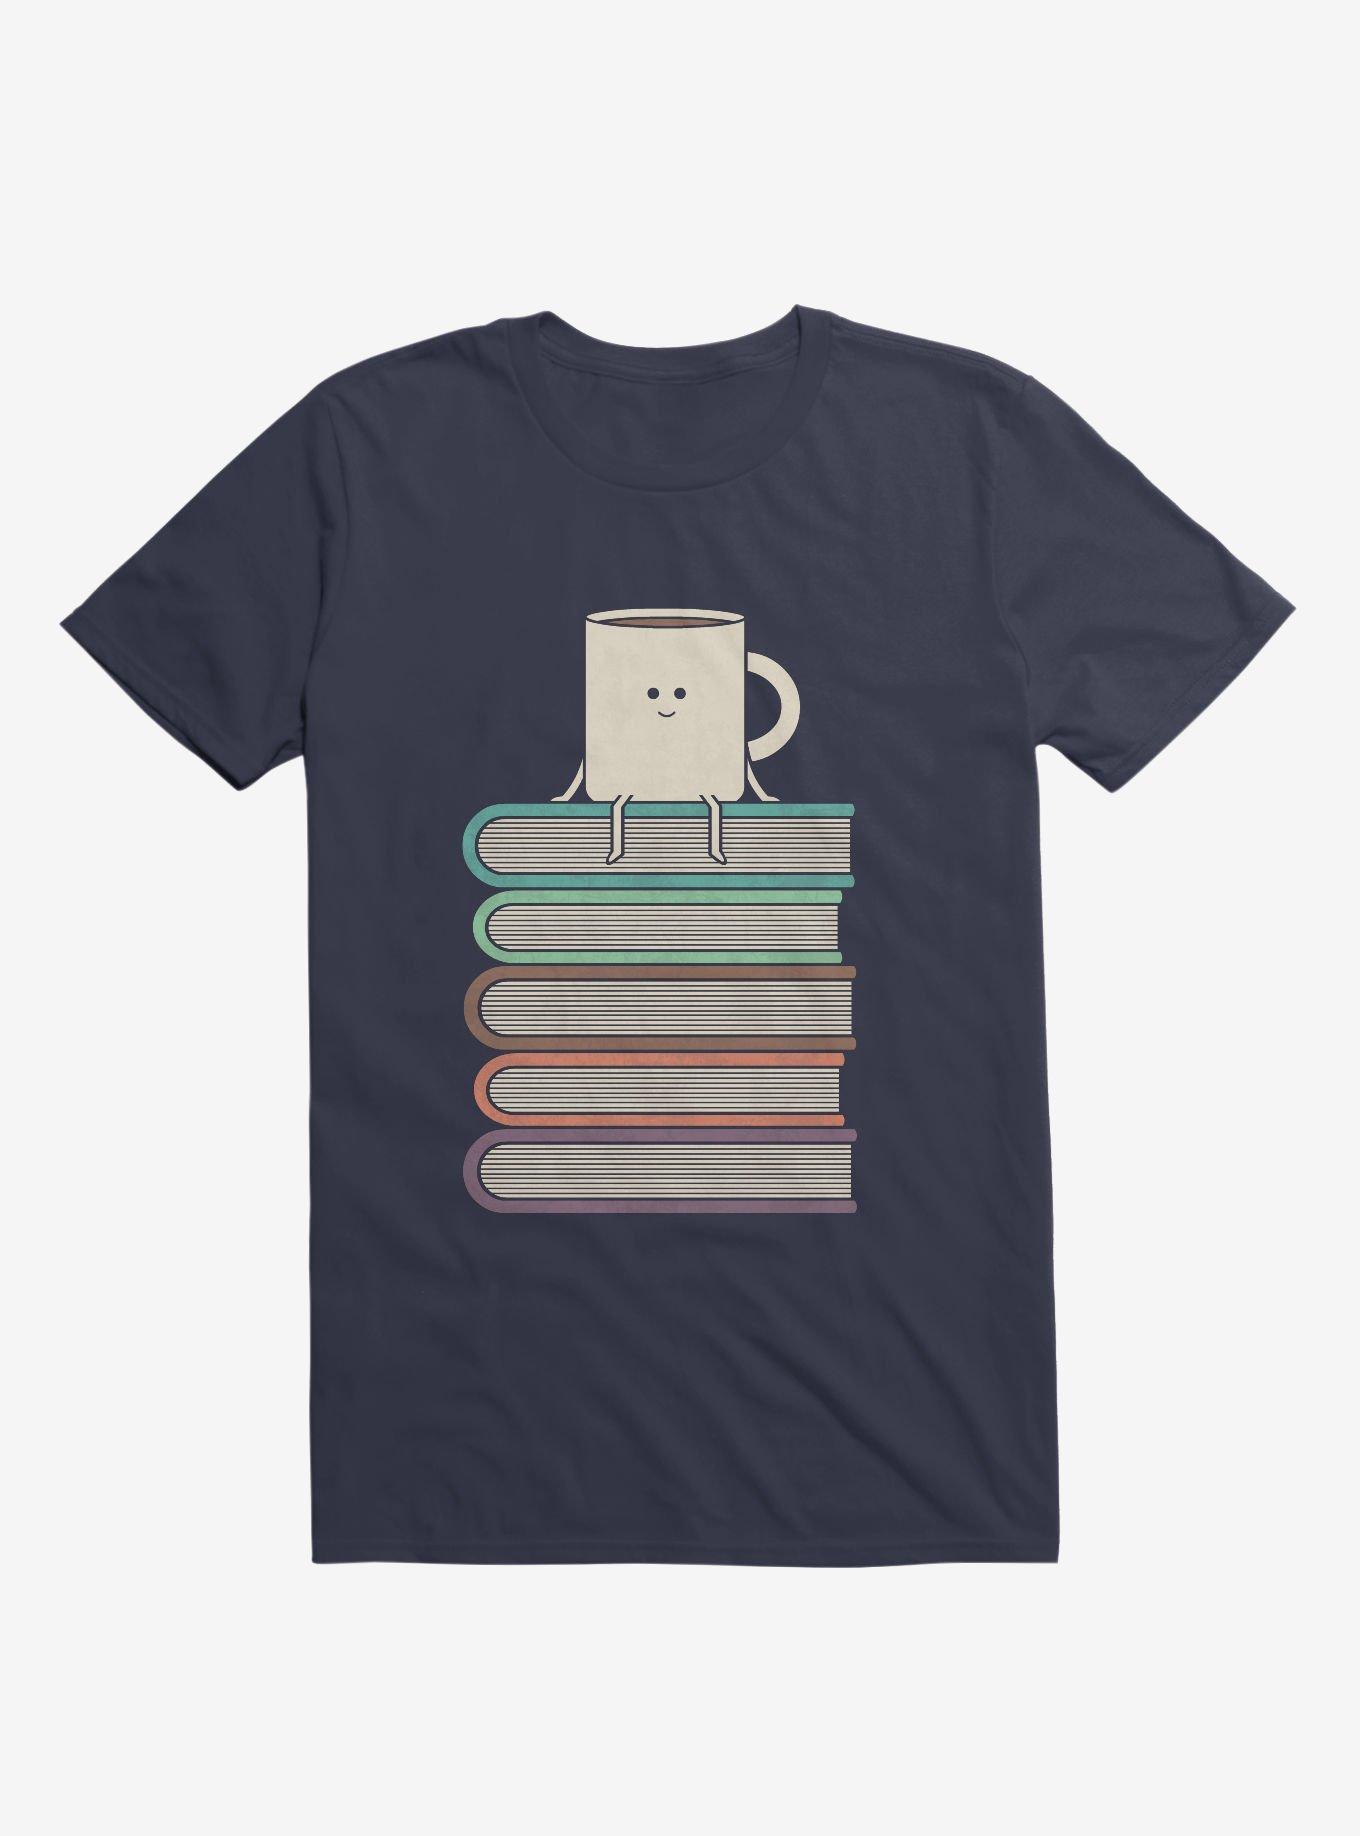 Top Of The World Cup On Books Navy Blue T-Shirt, NAVY, hi-res